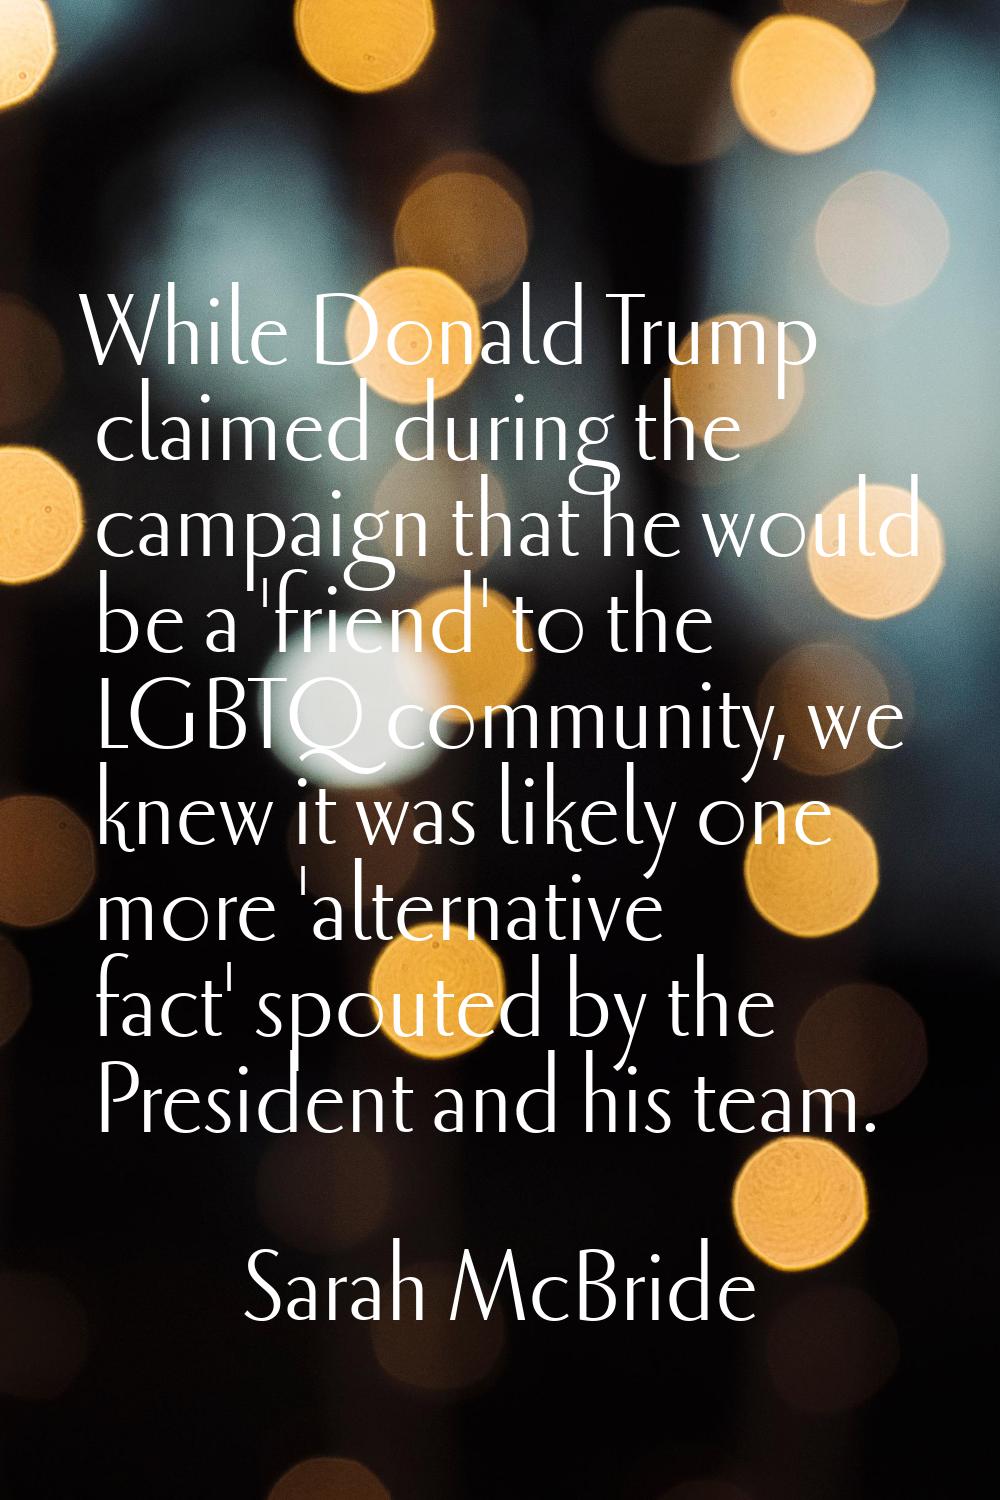 While Donald Trump claimed during the campaign that he would be a 'friend' to the LGBTQ community, 